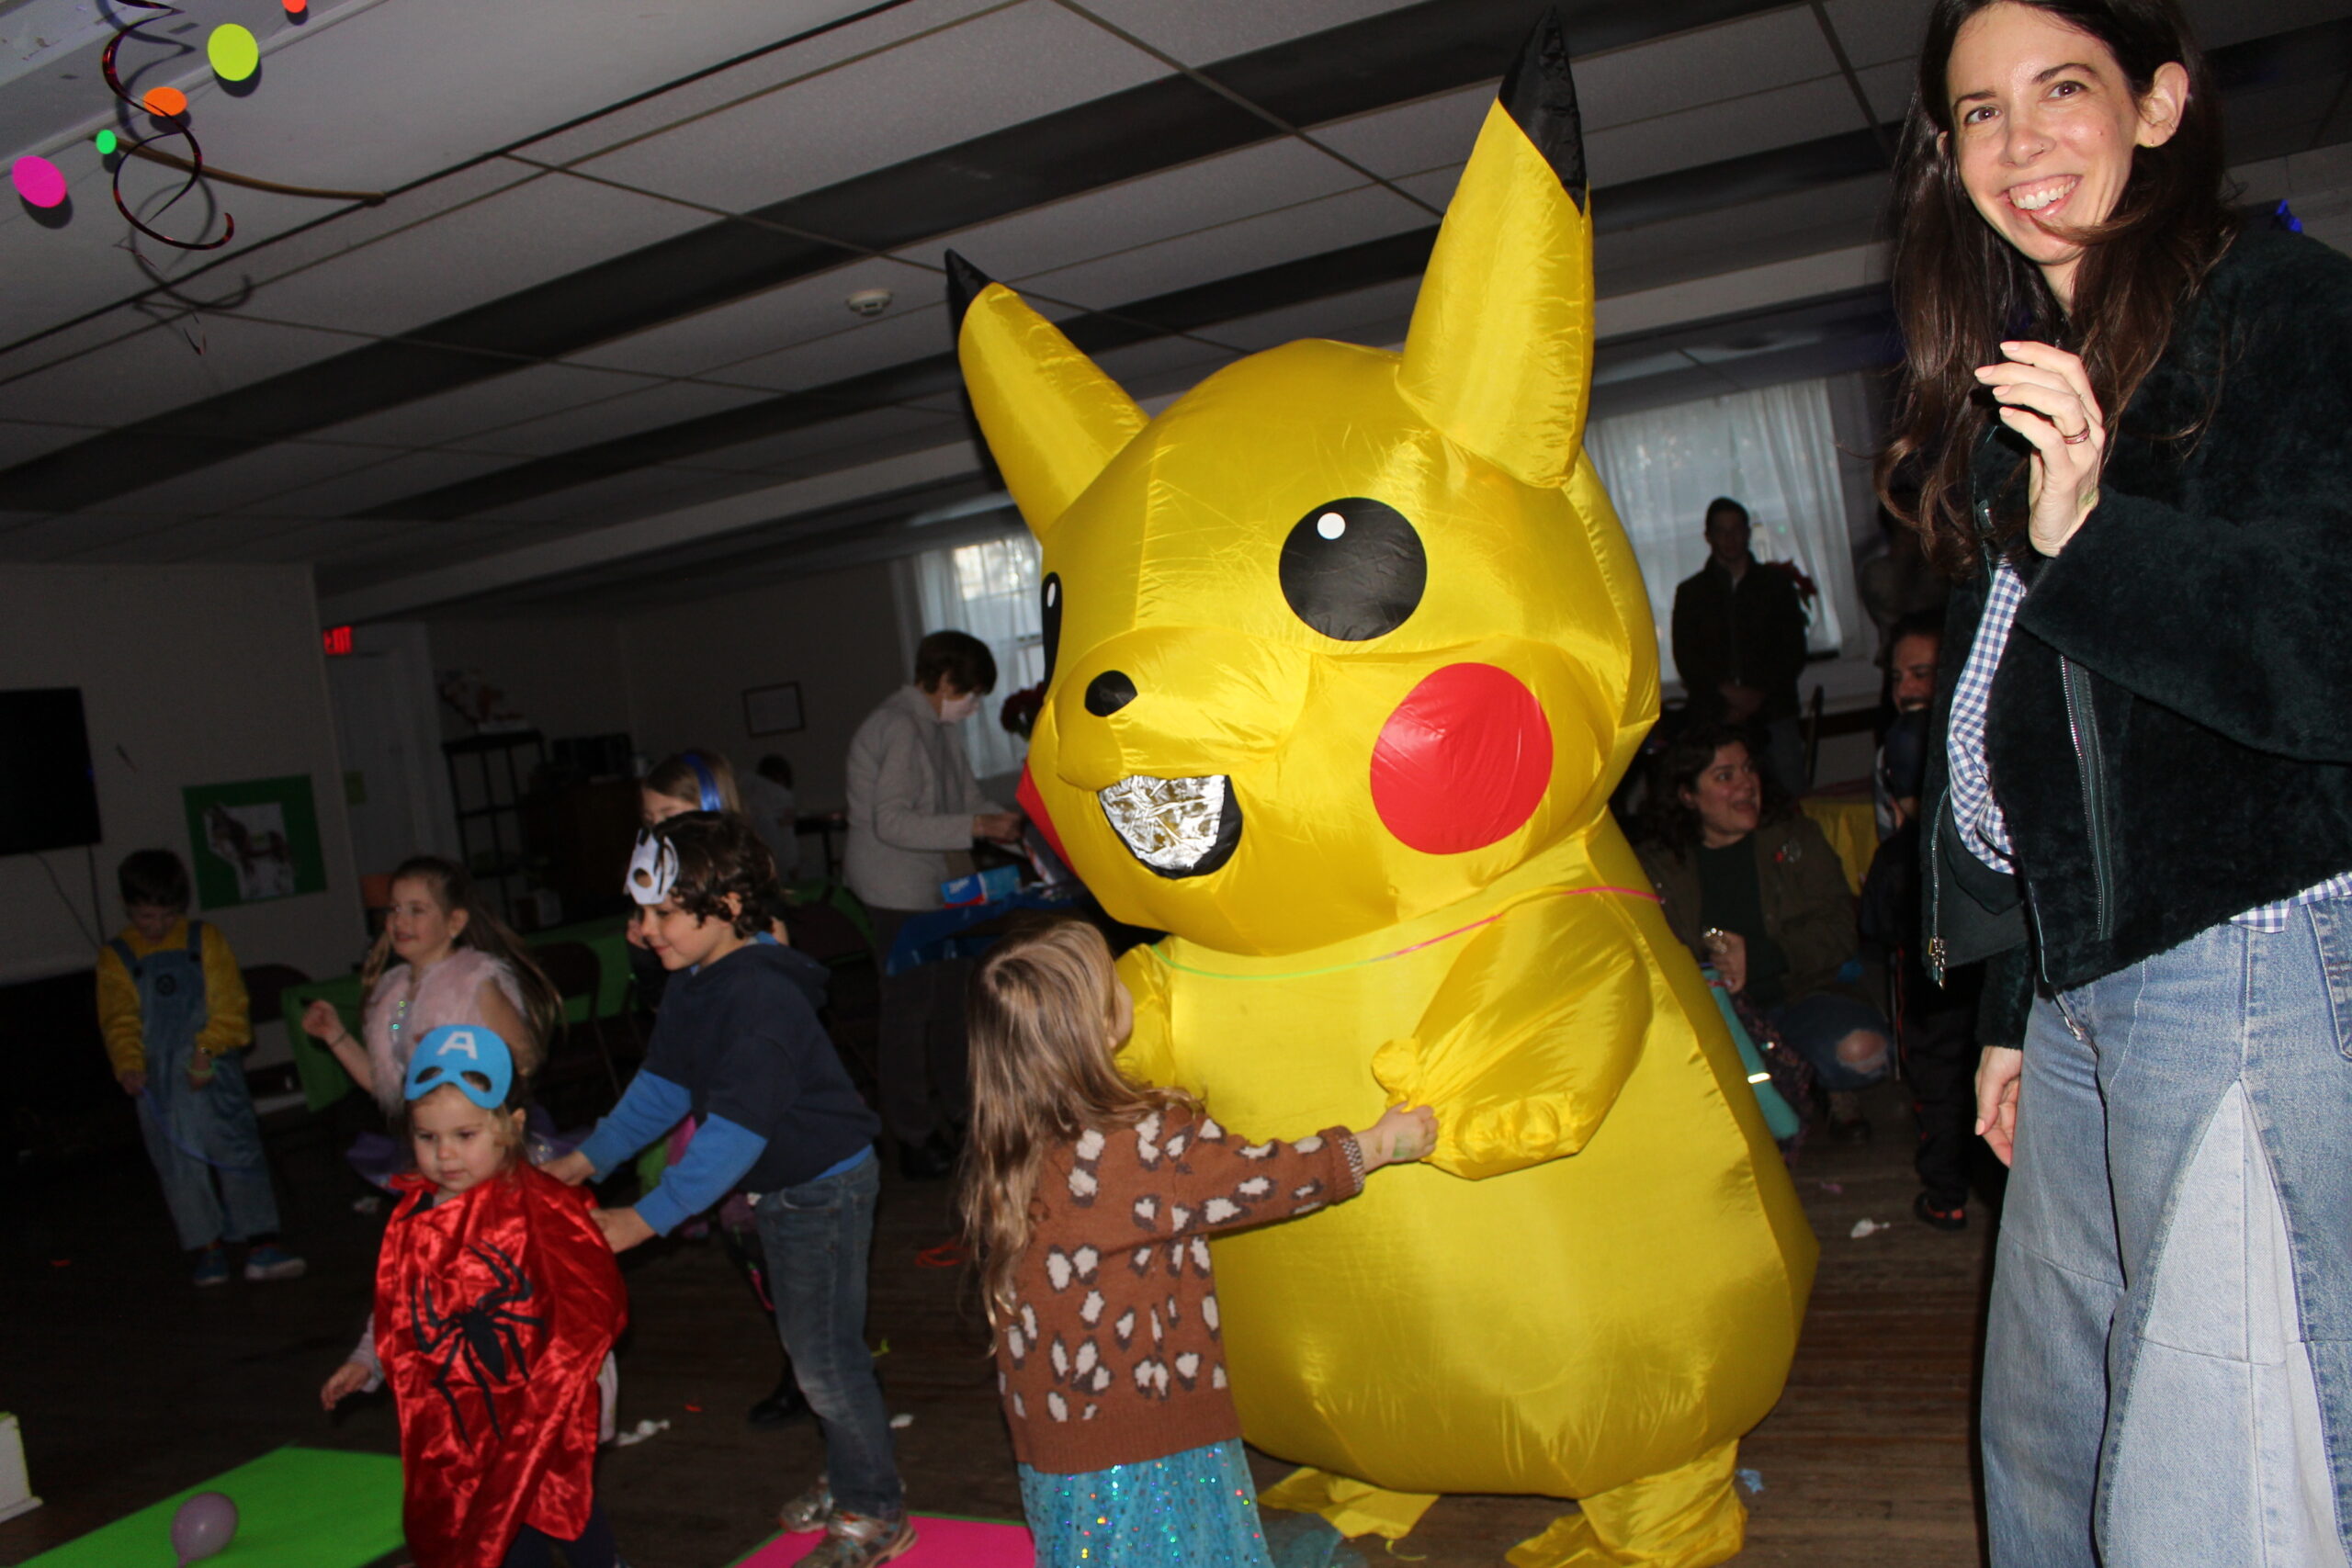 Pokemon made an appearance at Temple Adas Israel's Purim Party last Monday, March 6, in Sag Harbor. COURTESY BONNIE MAHONEY